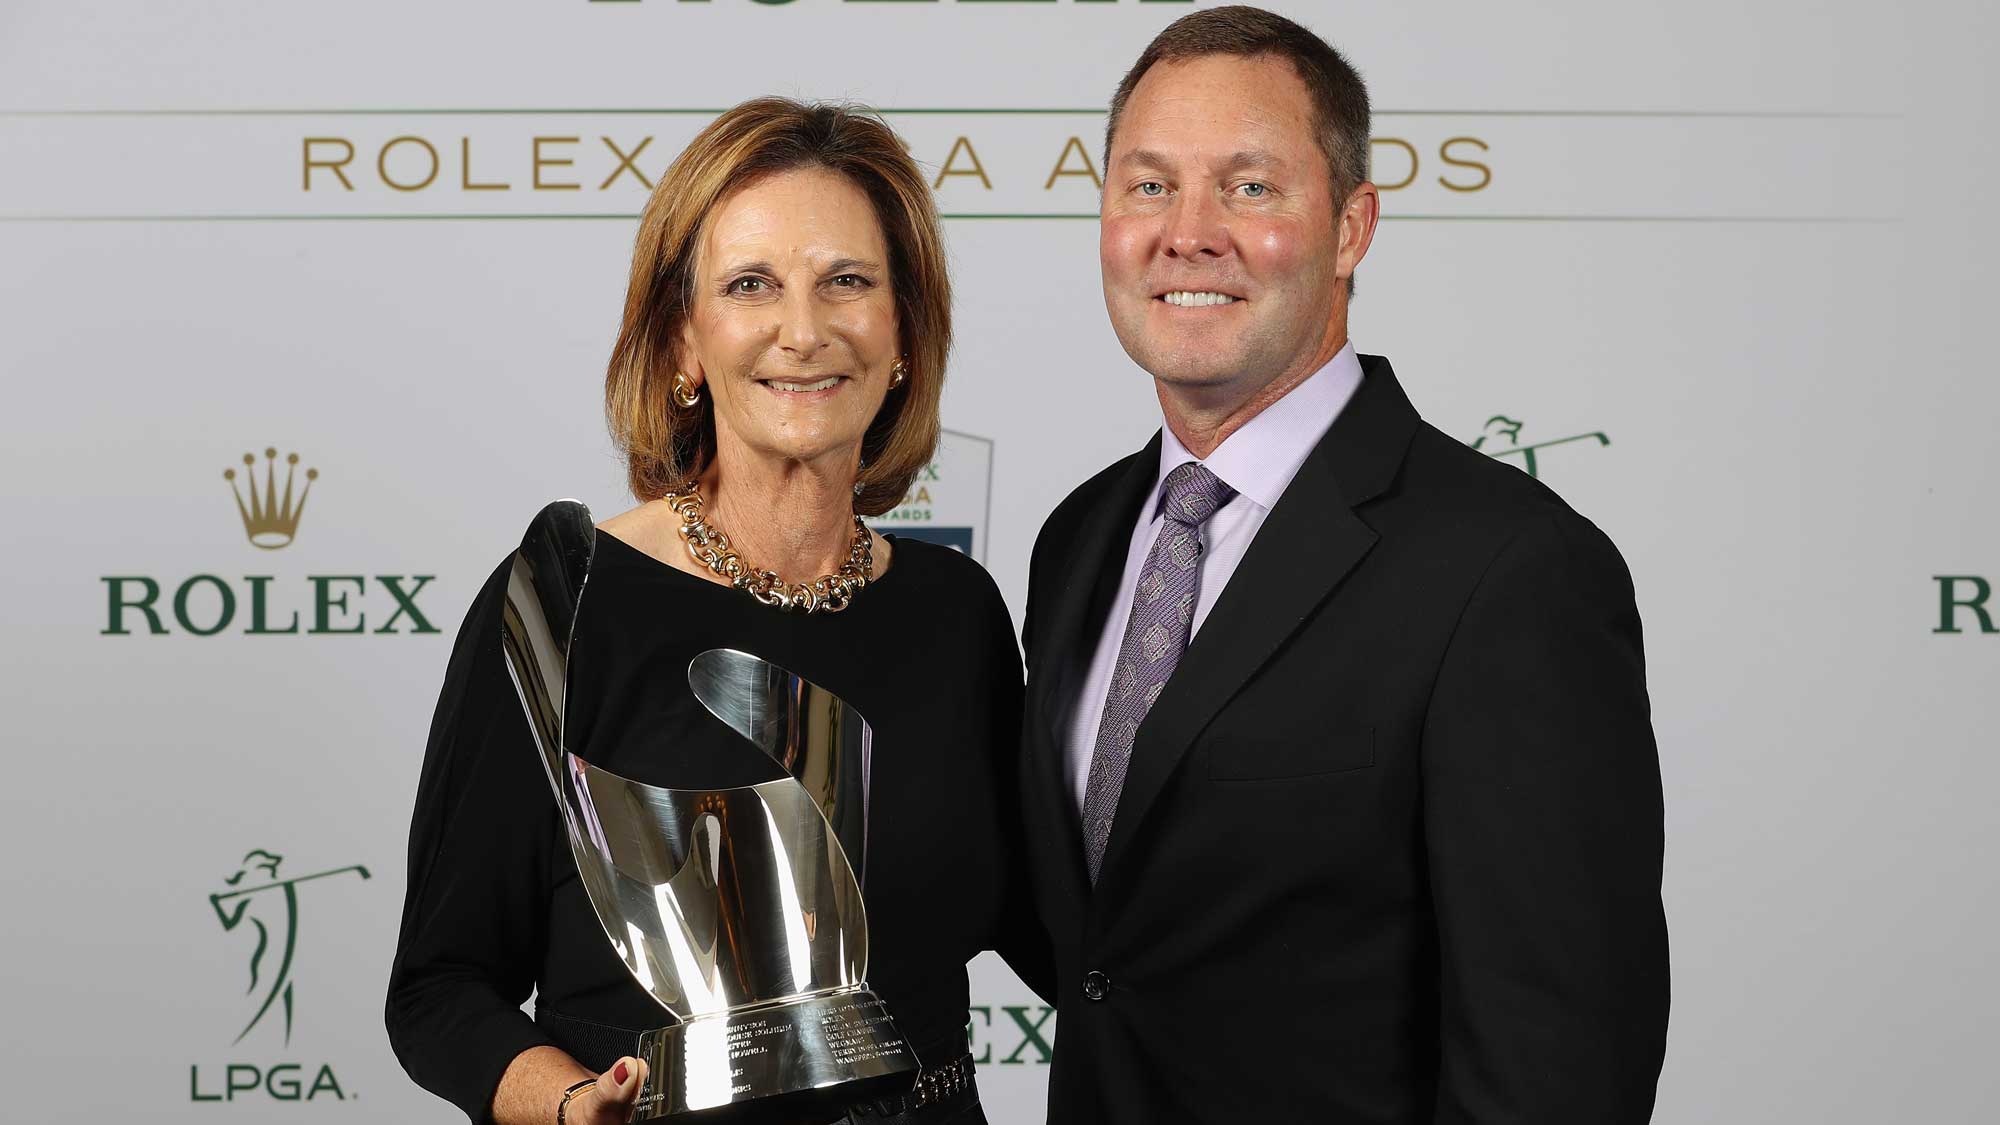 Commissioners Award recipient Roberta Bowman poses with LPGA Tour commissioner Mike Whan during the LPGA Rolex Players Awards at The Ritz-Carlton Golf Resort